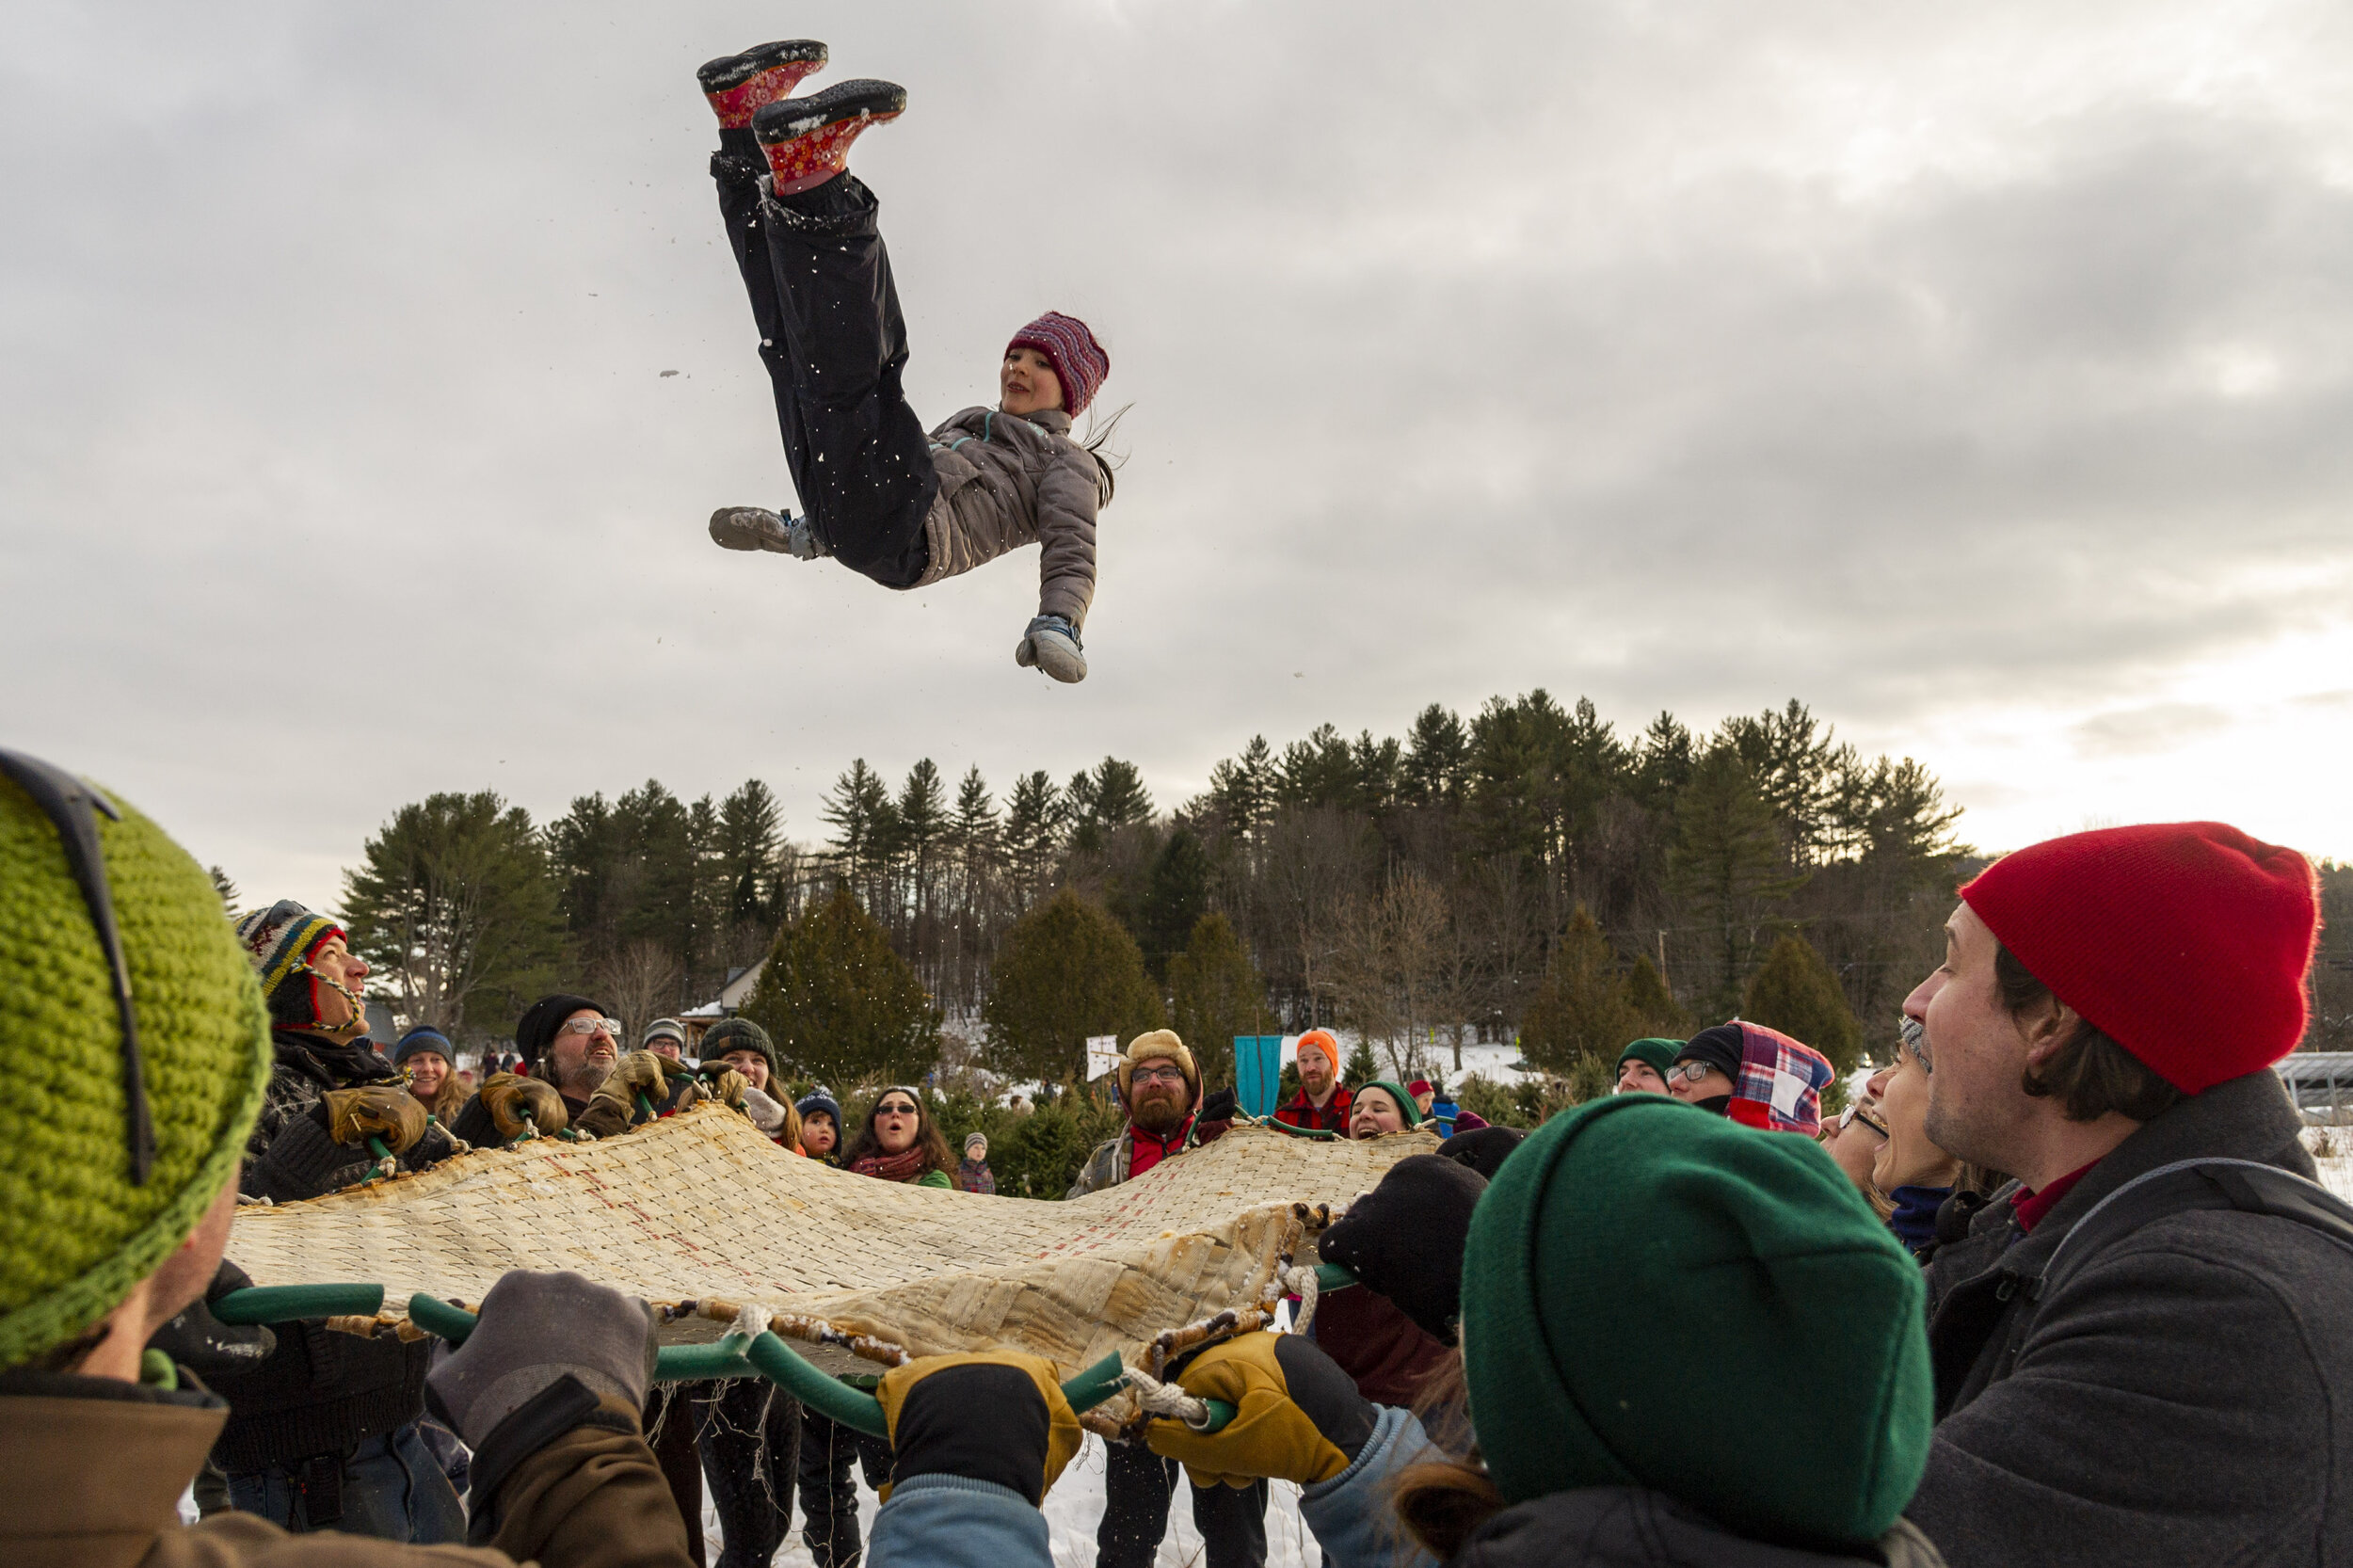  Maia Boyer braces for impact at the blanket toss during the Ice On Fire festival at the North Branch Nature Center in Montpelier, VT on Sunday, February 2nd 2020. 